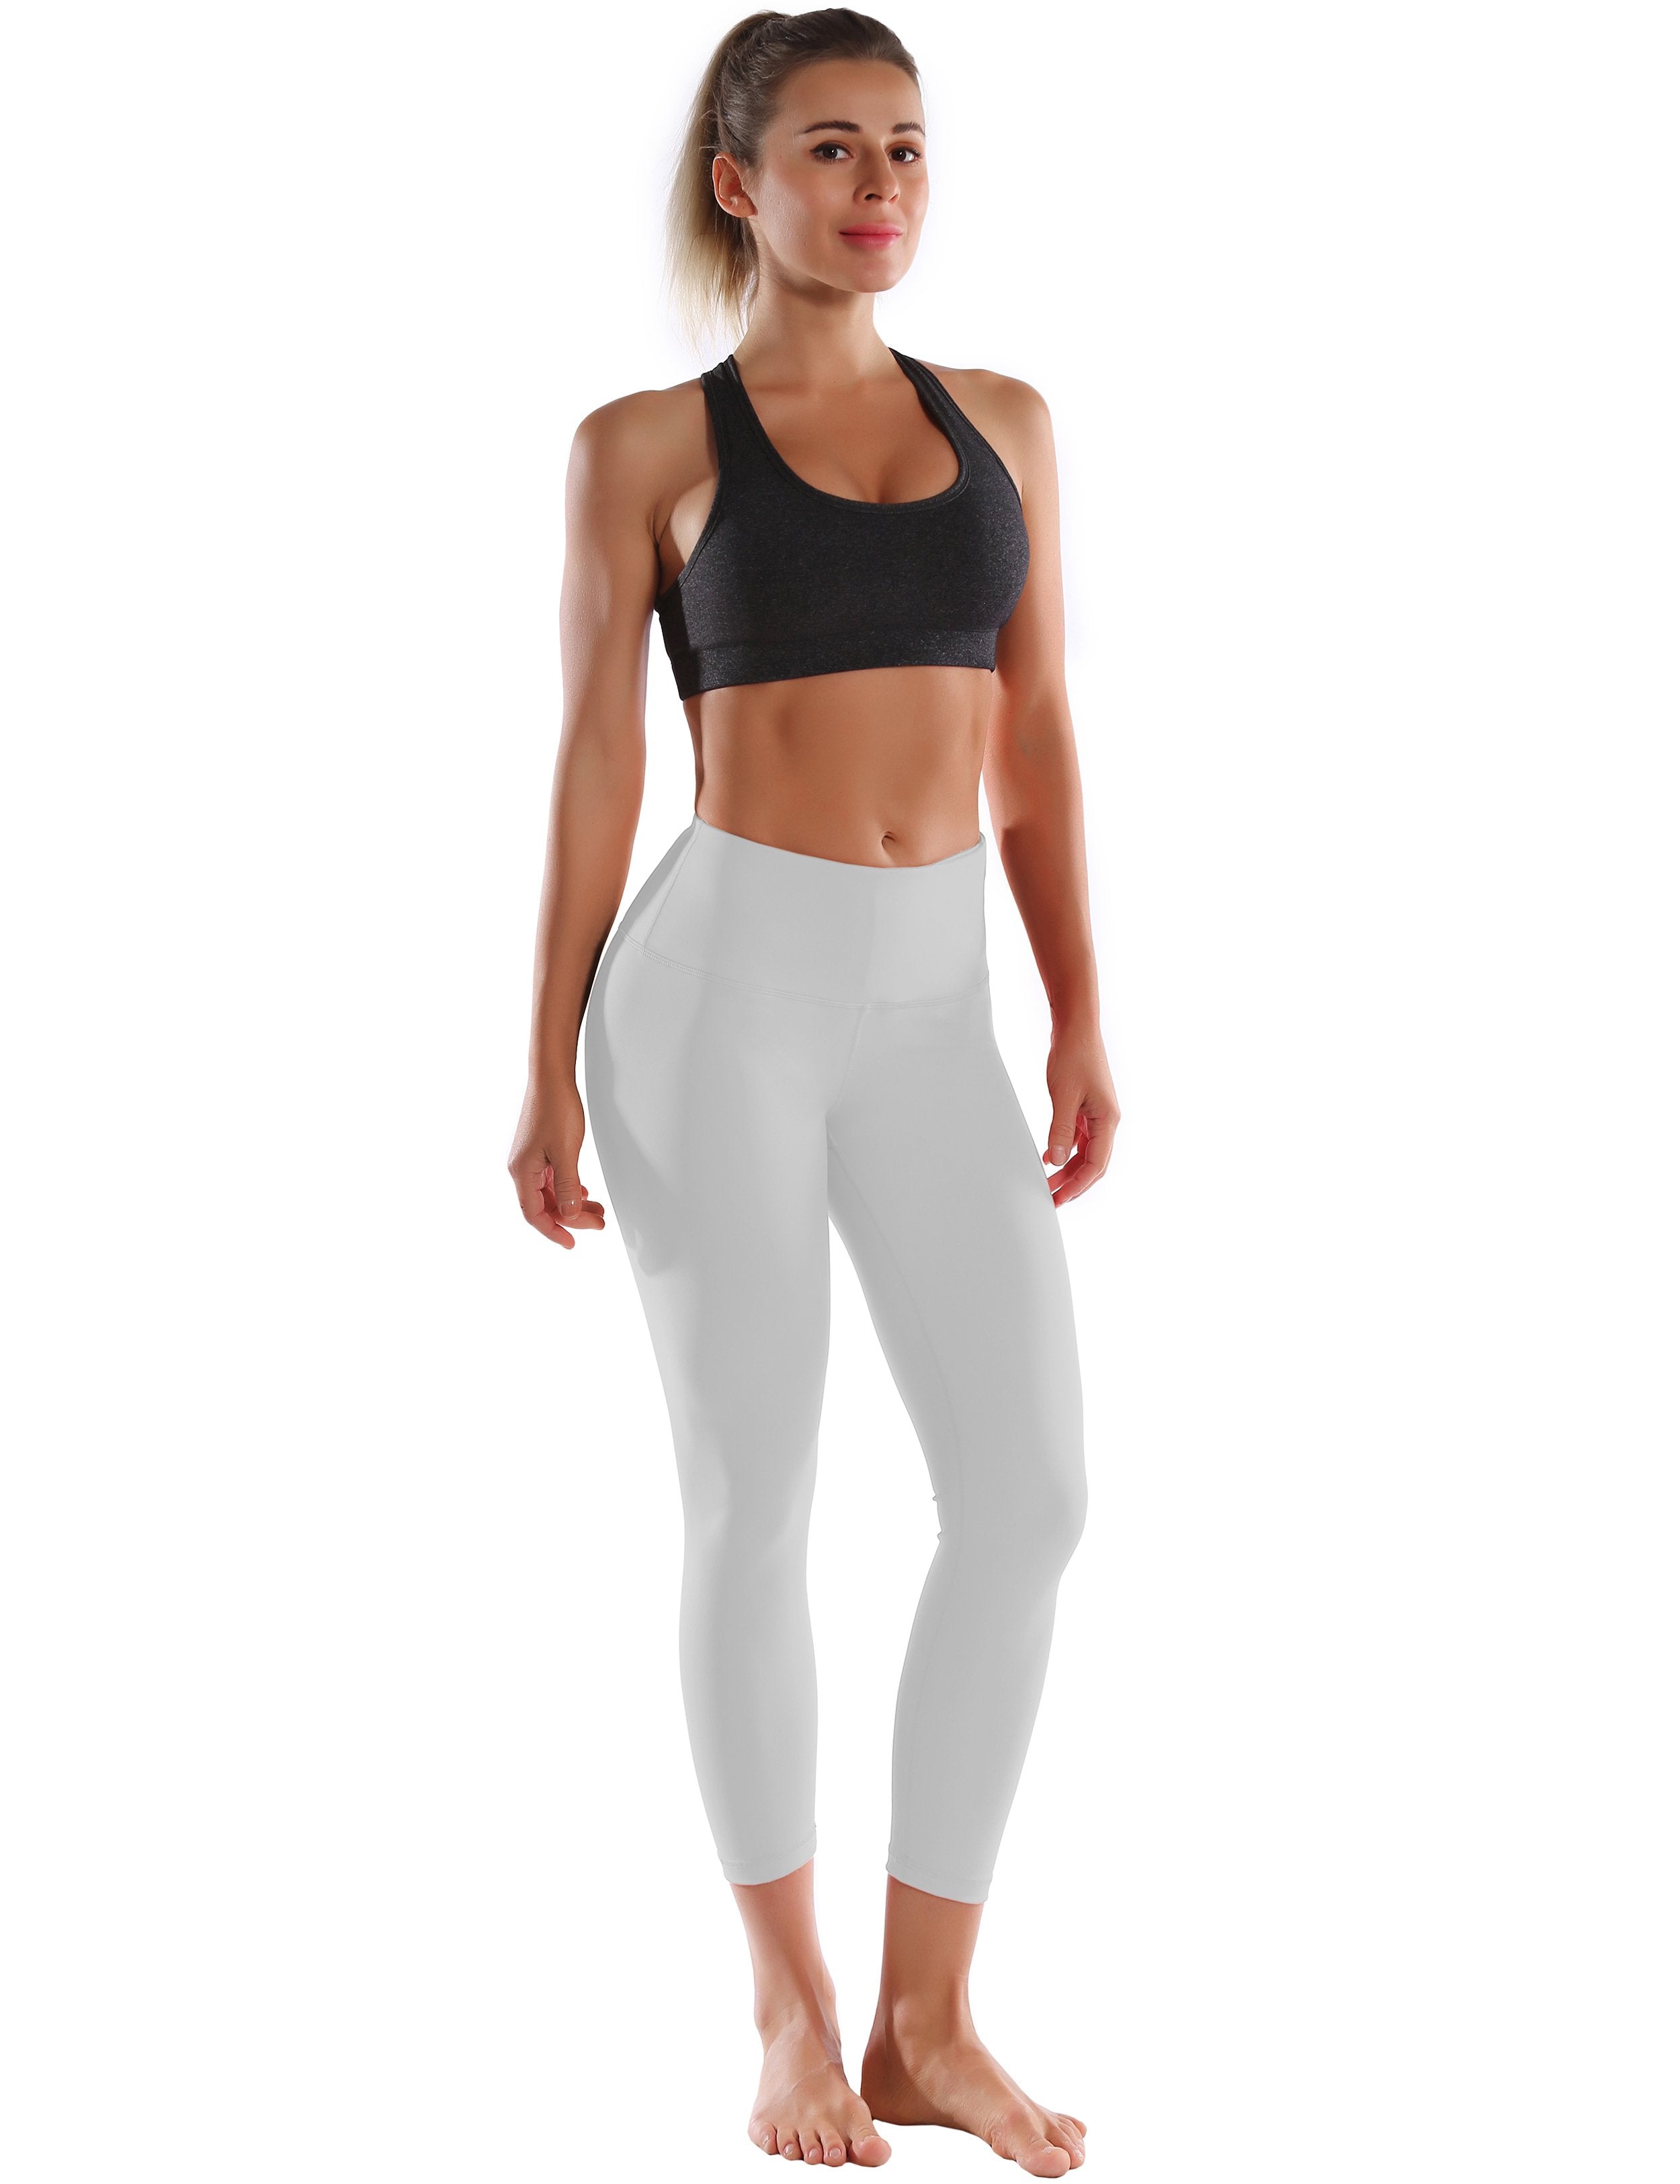 22" High Waist Crop Tight Capris lightgray 75%Nylon/25%Spandex Fabric doesn't attract lint easily 4-way stretch No see-through Moisture-wicking Tummy control Inner pocket